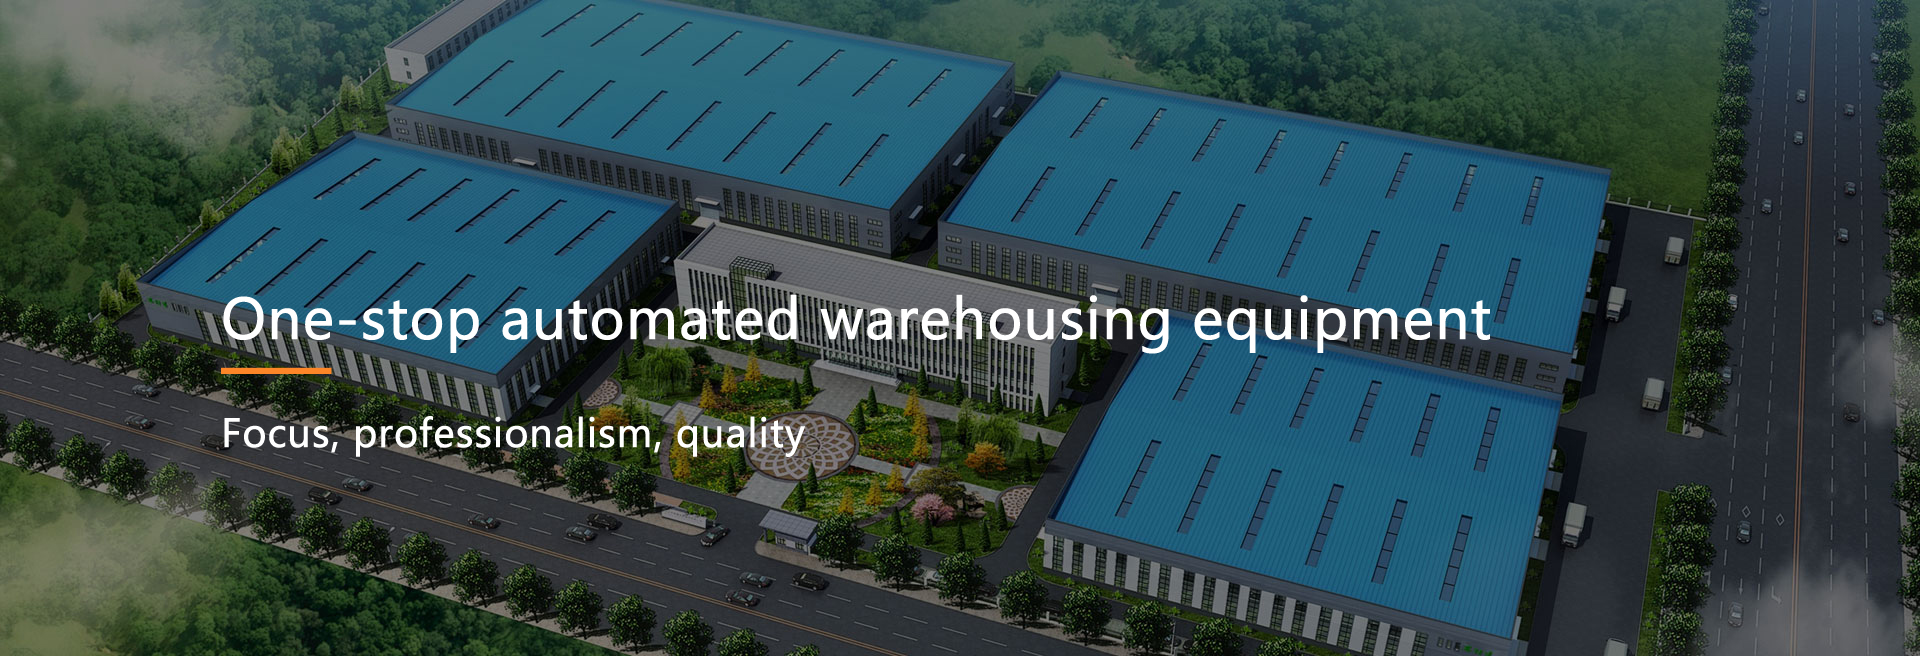 One-stop automated warehousing equipment